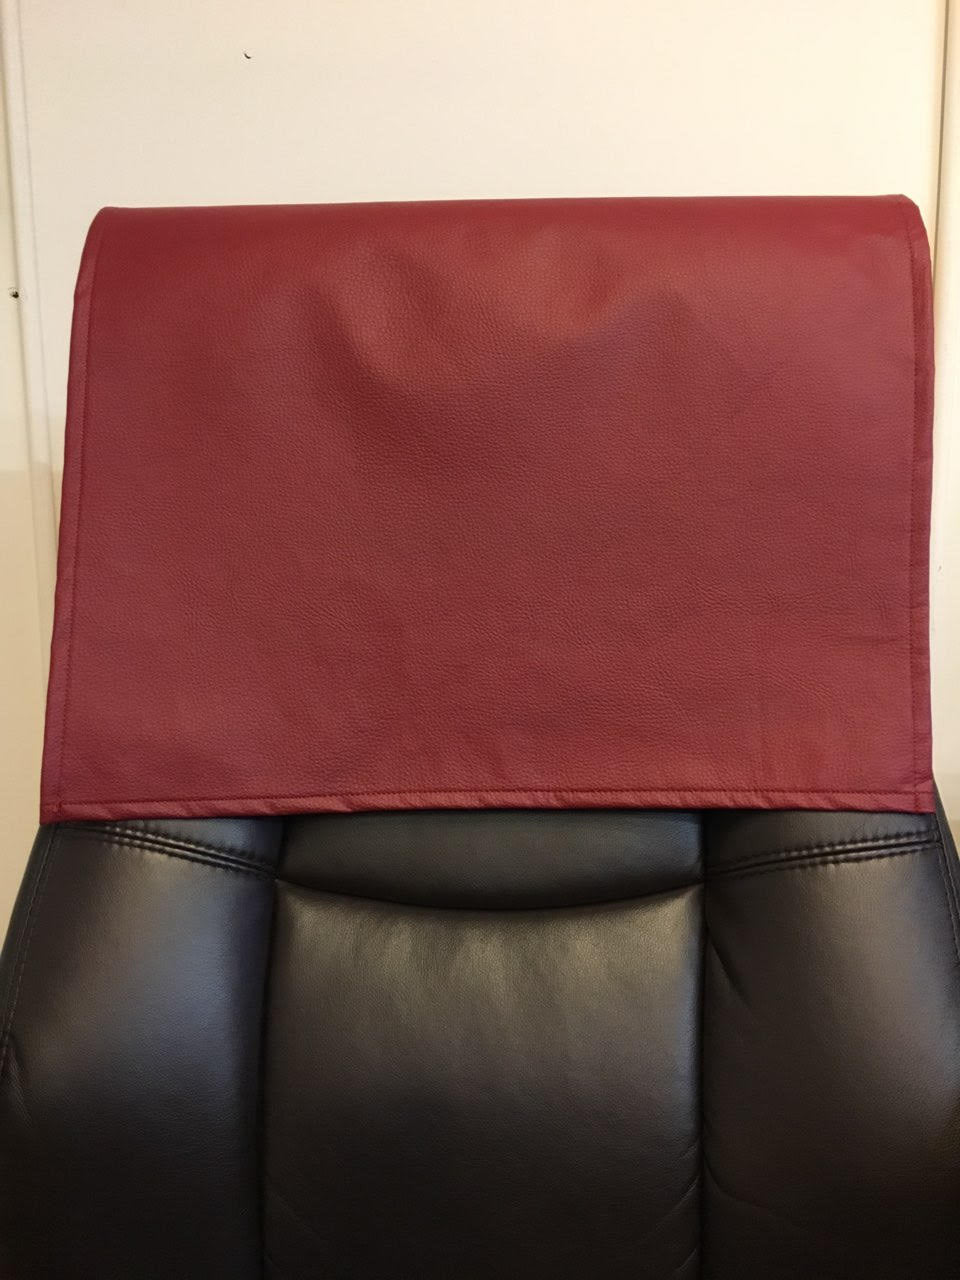 Cinnabar Red Champion Vinyl 15”x15” Recliner Furniture Protector Cover || Home Décor